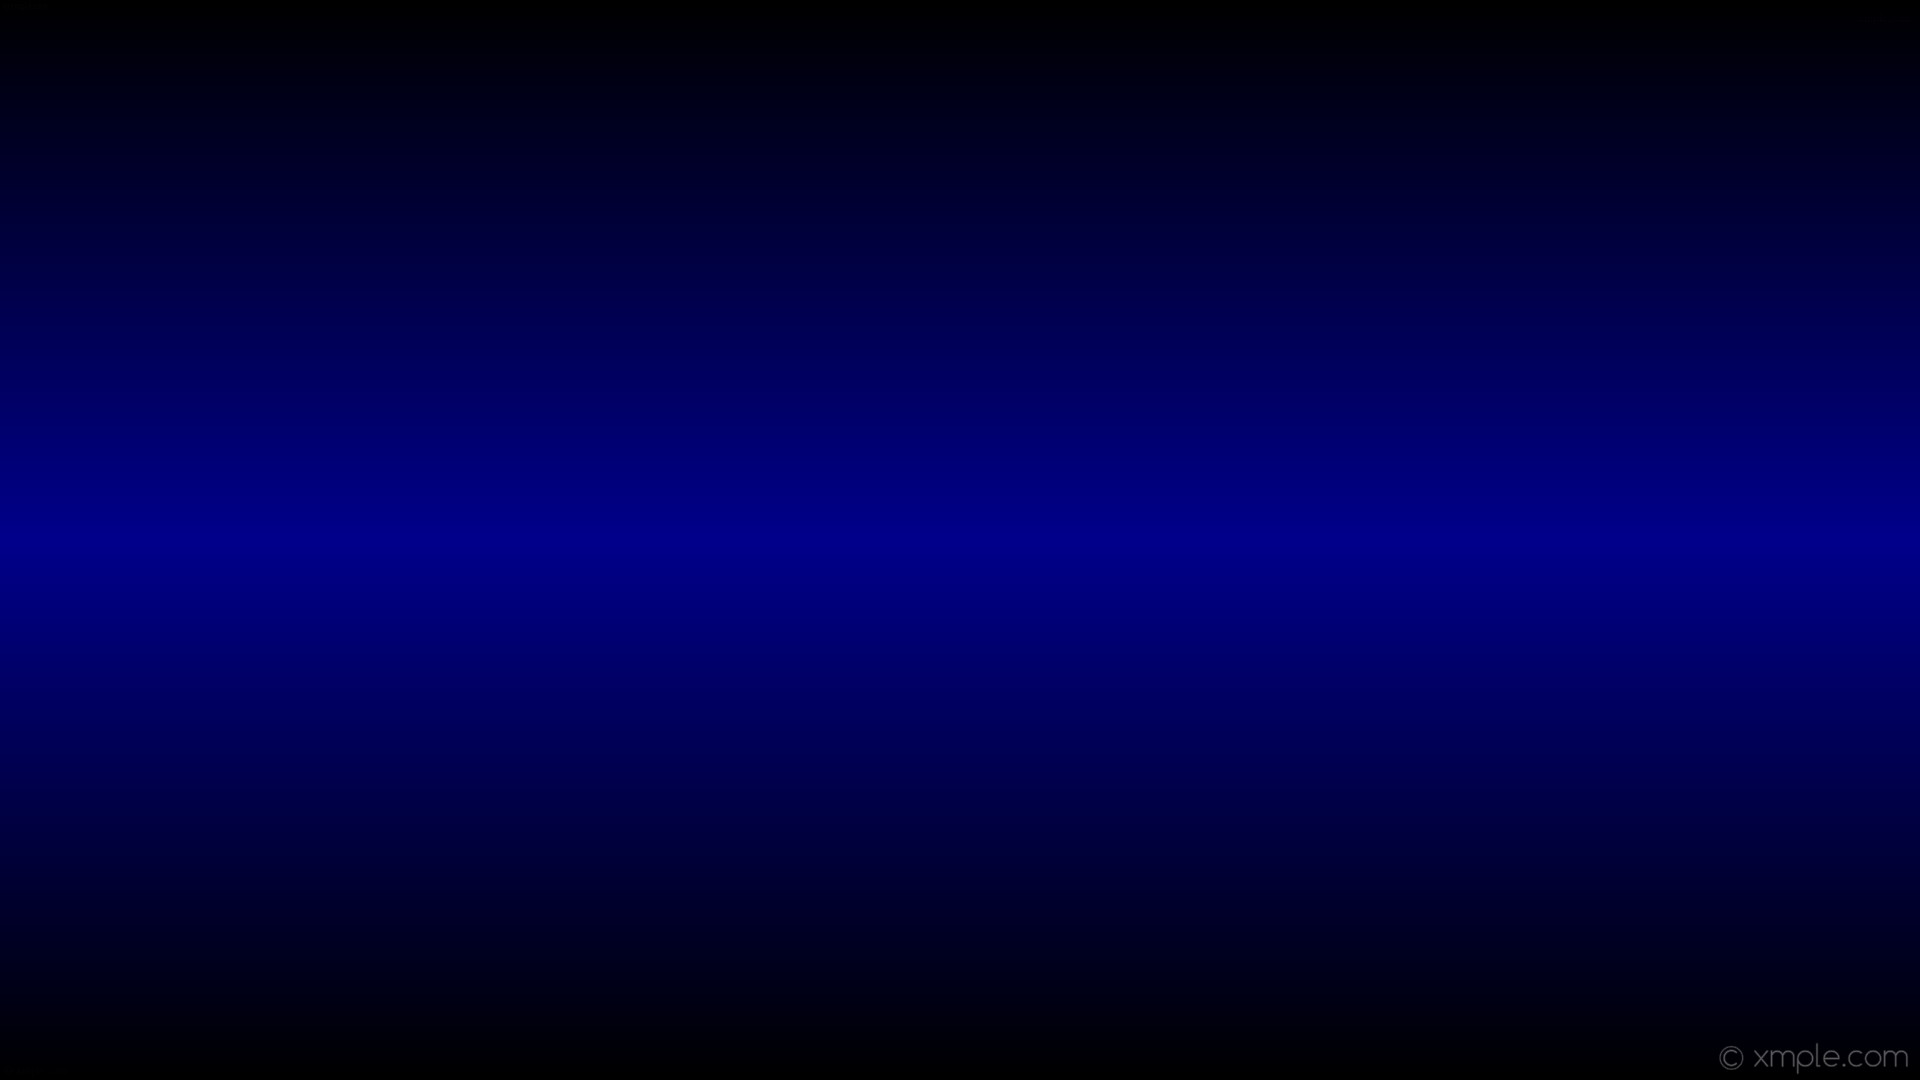 Dark Blue Wallpapers Hd 68 Images